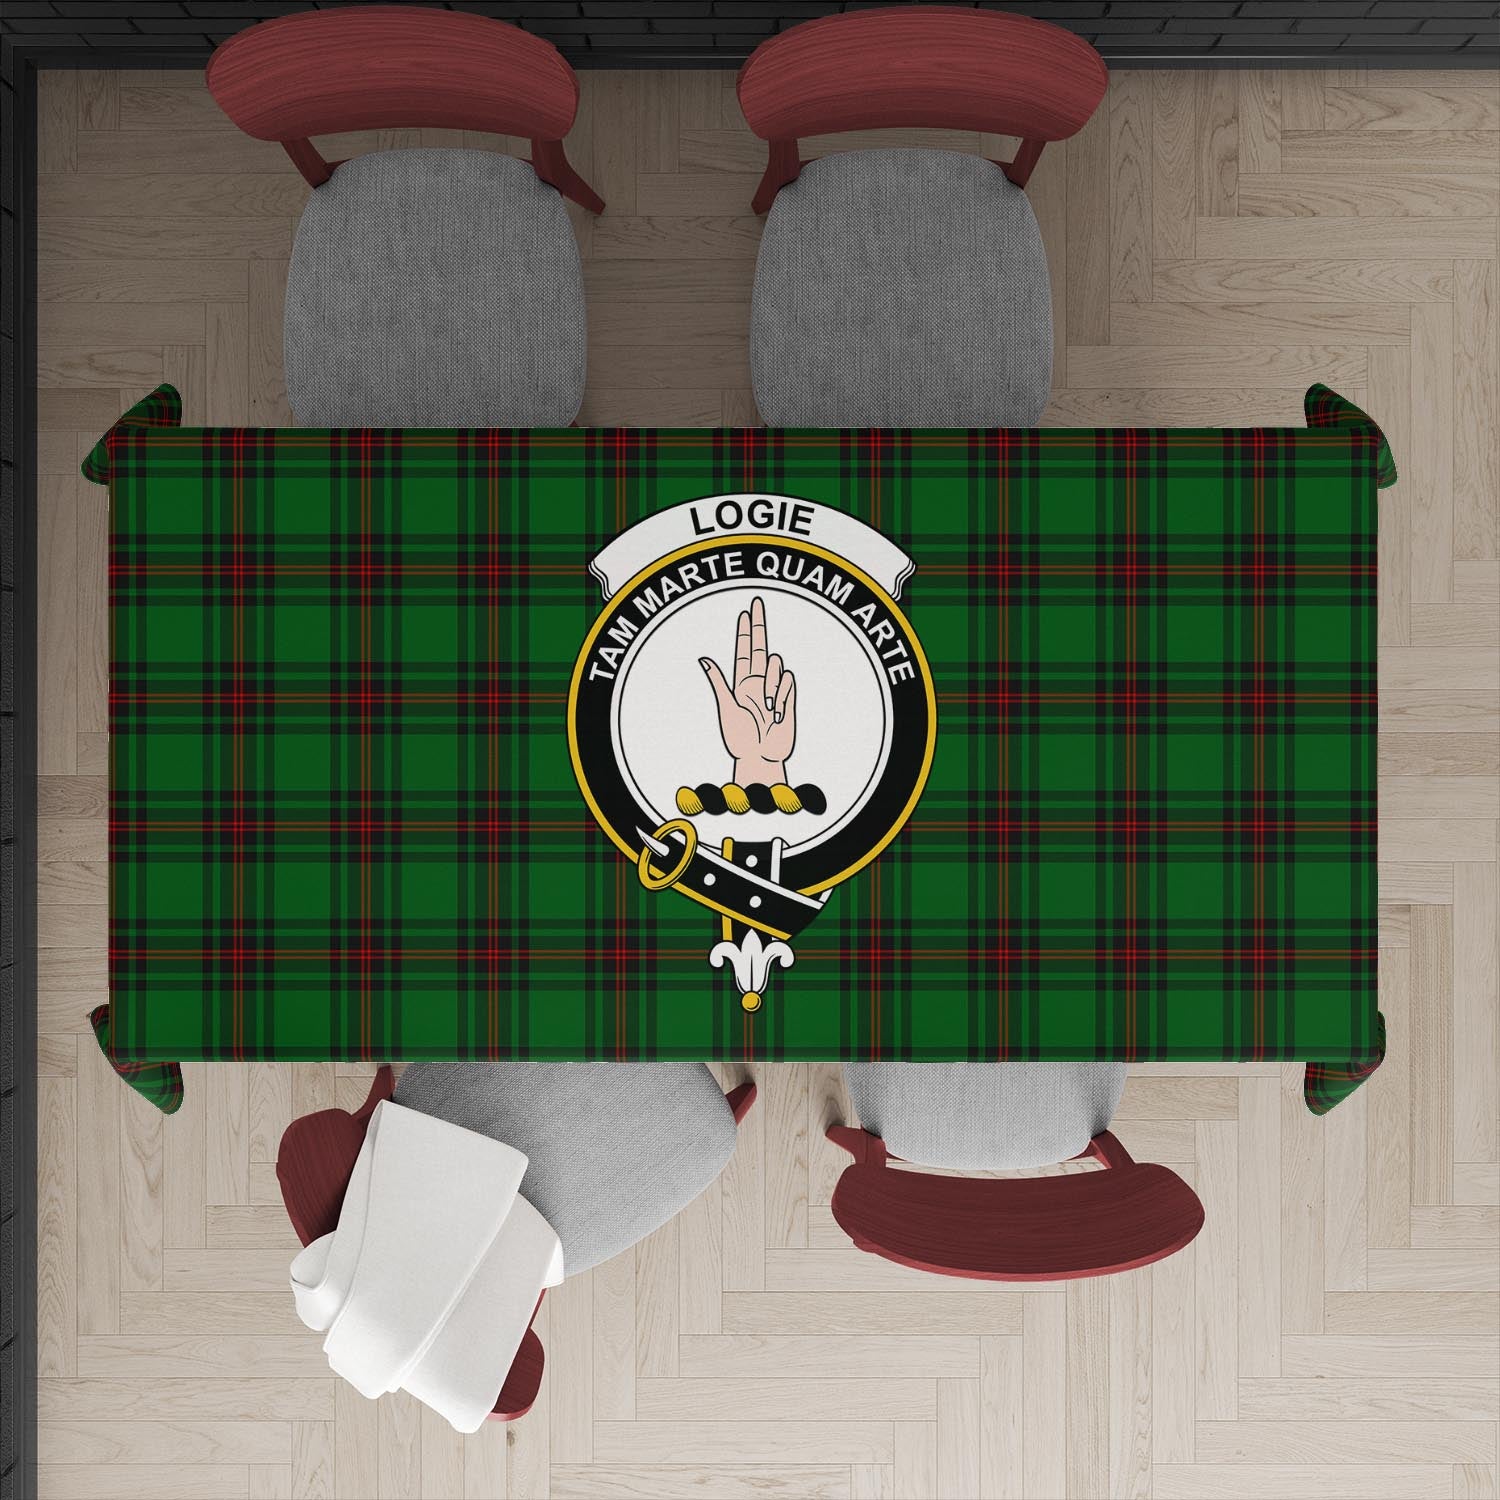 logie-tatan-tablecloth-with-family-crest